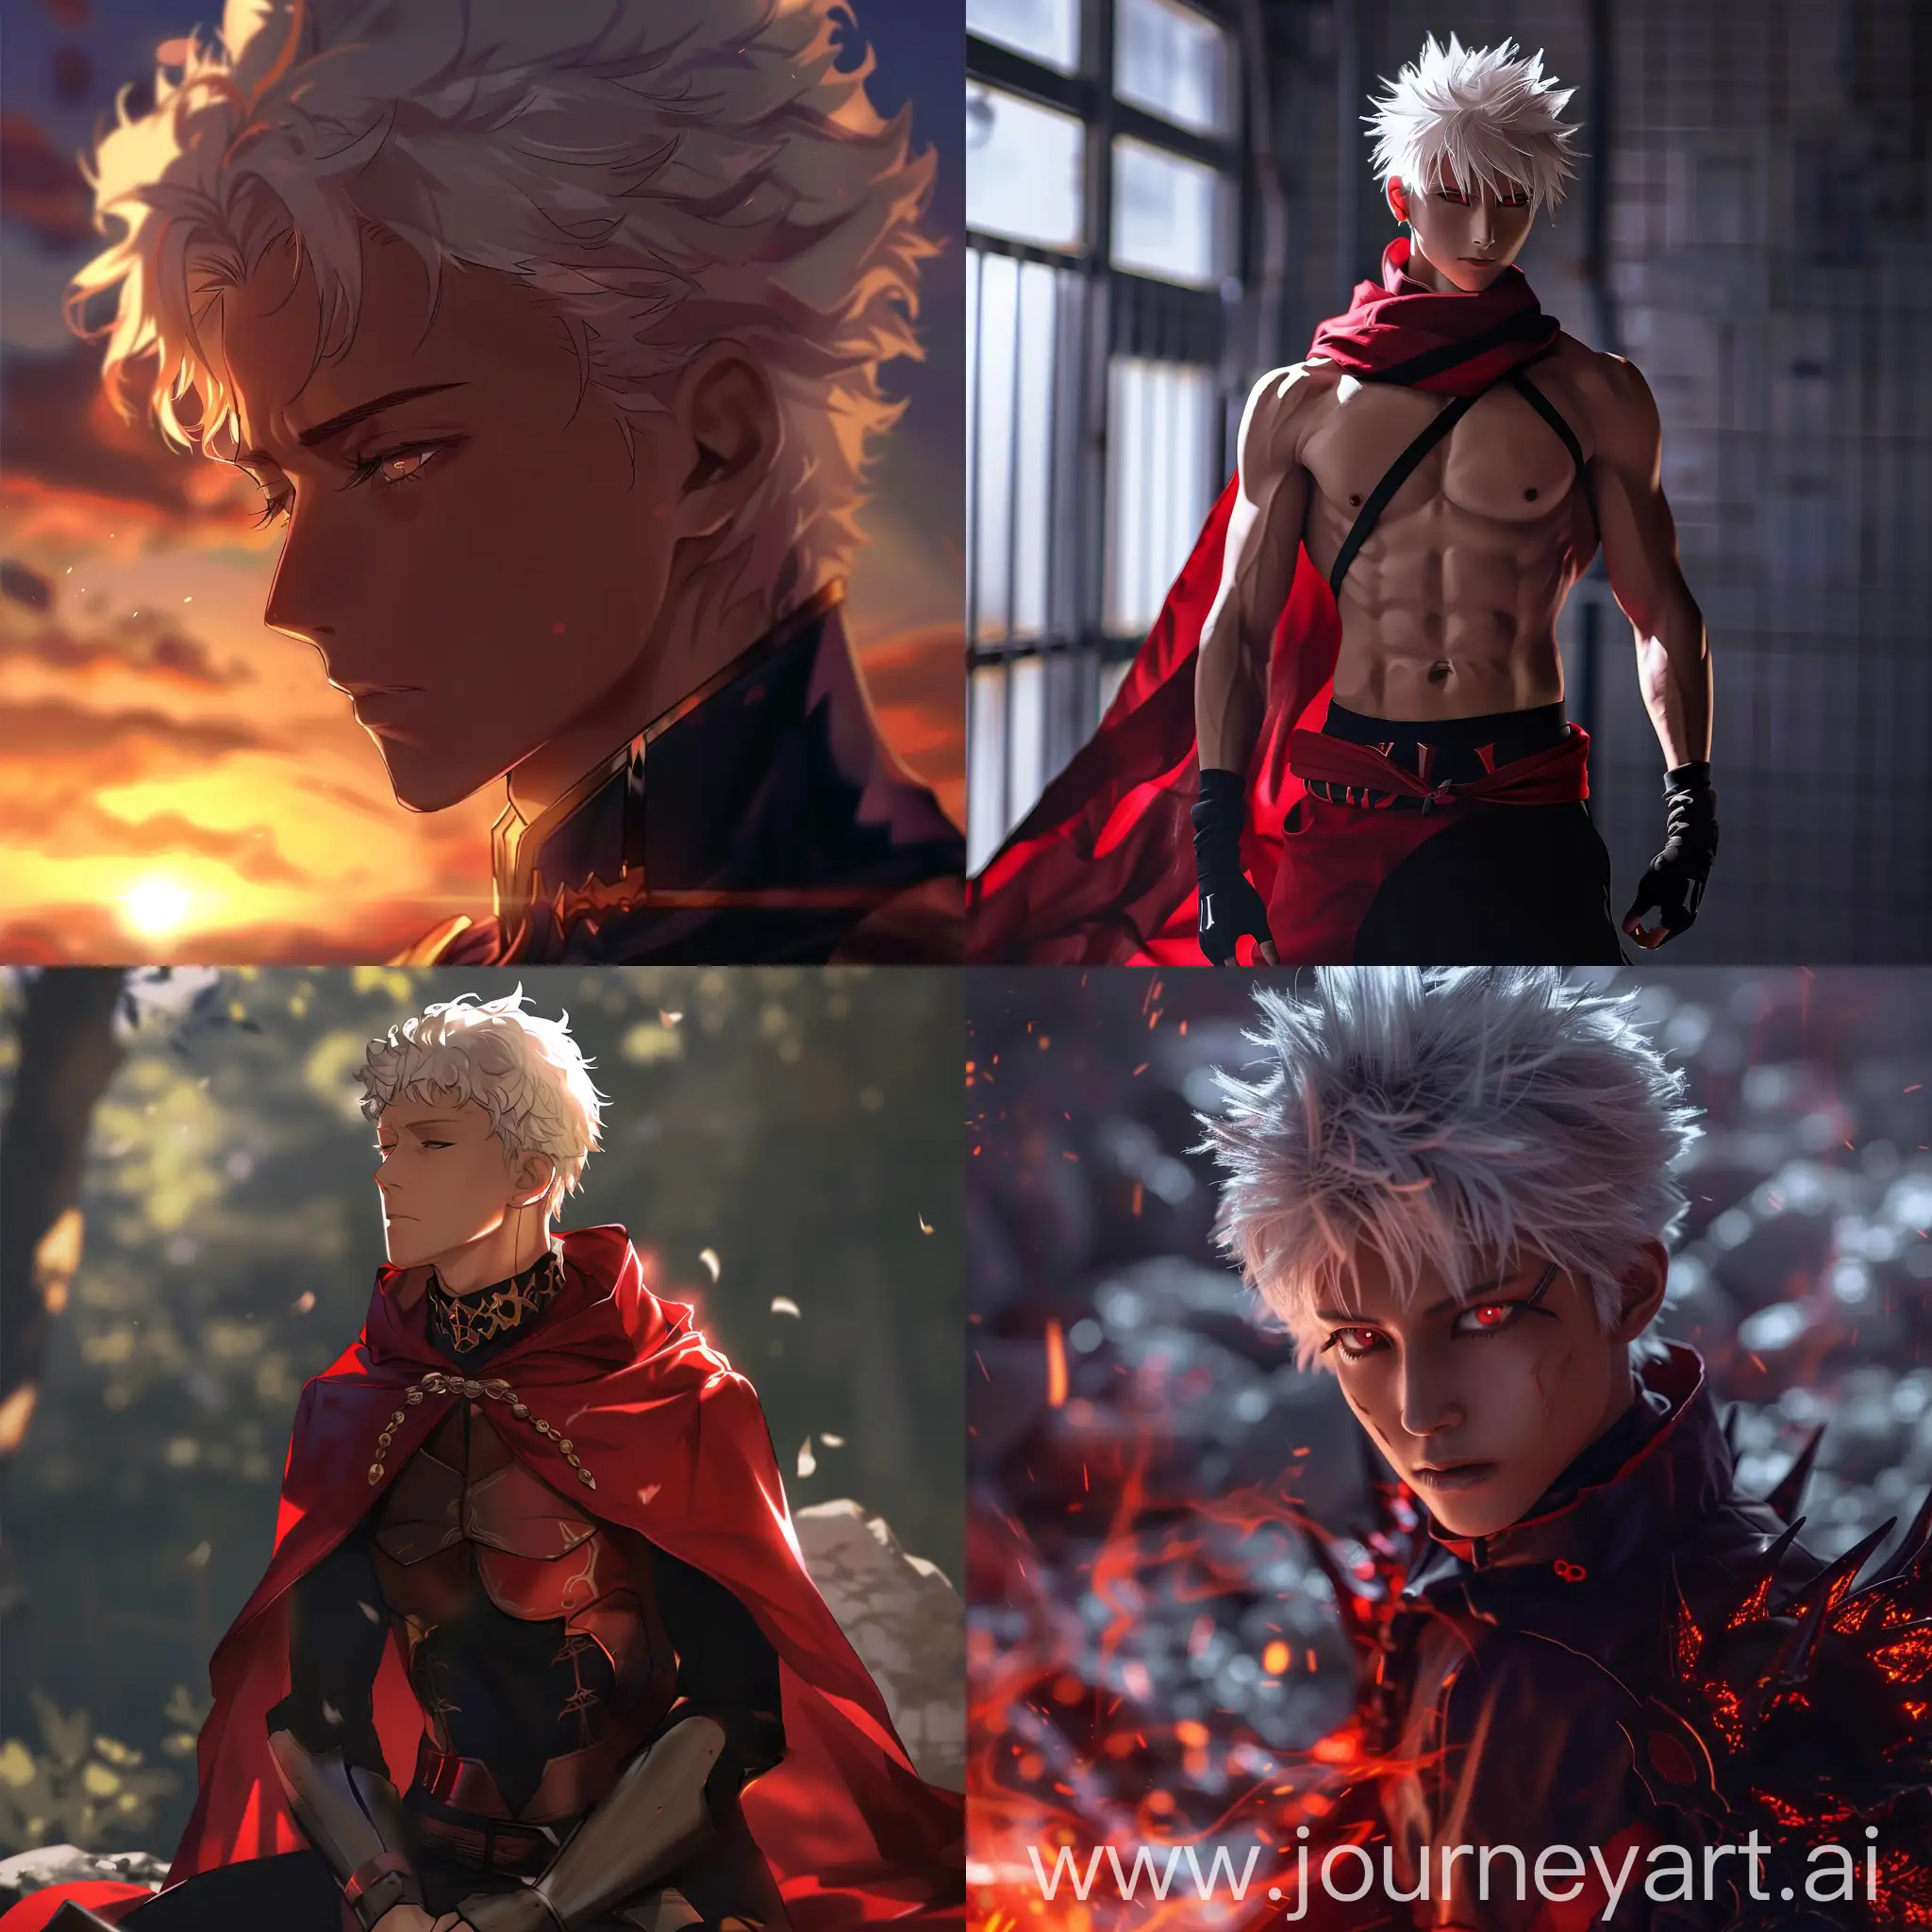 Emiya-Alter-from-FateGrand-Order-2D-Anime-Realistic-Portrait